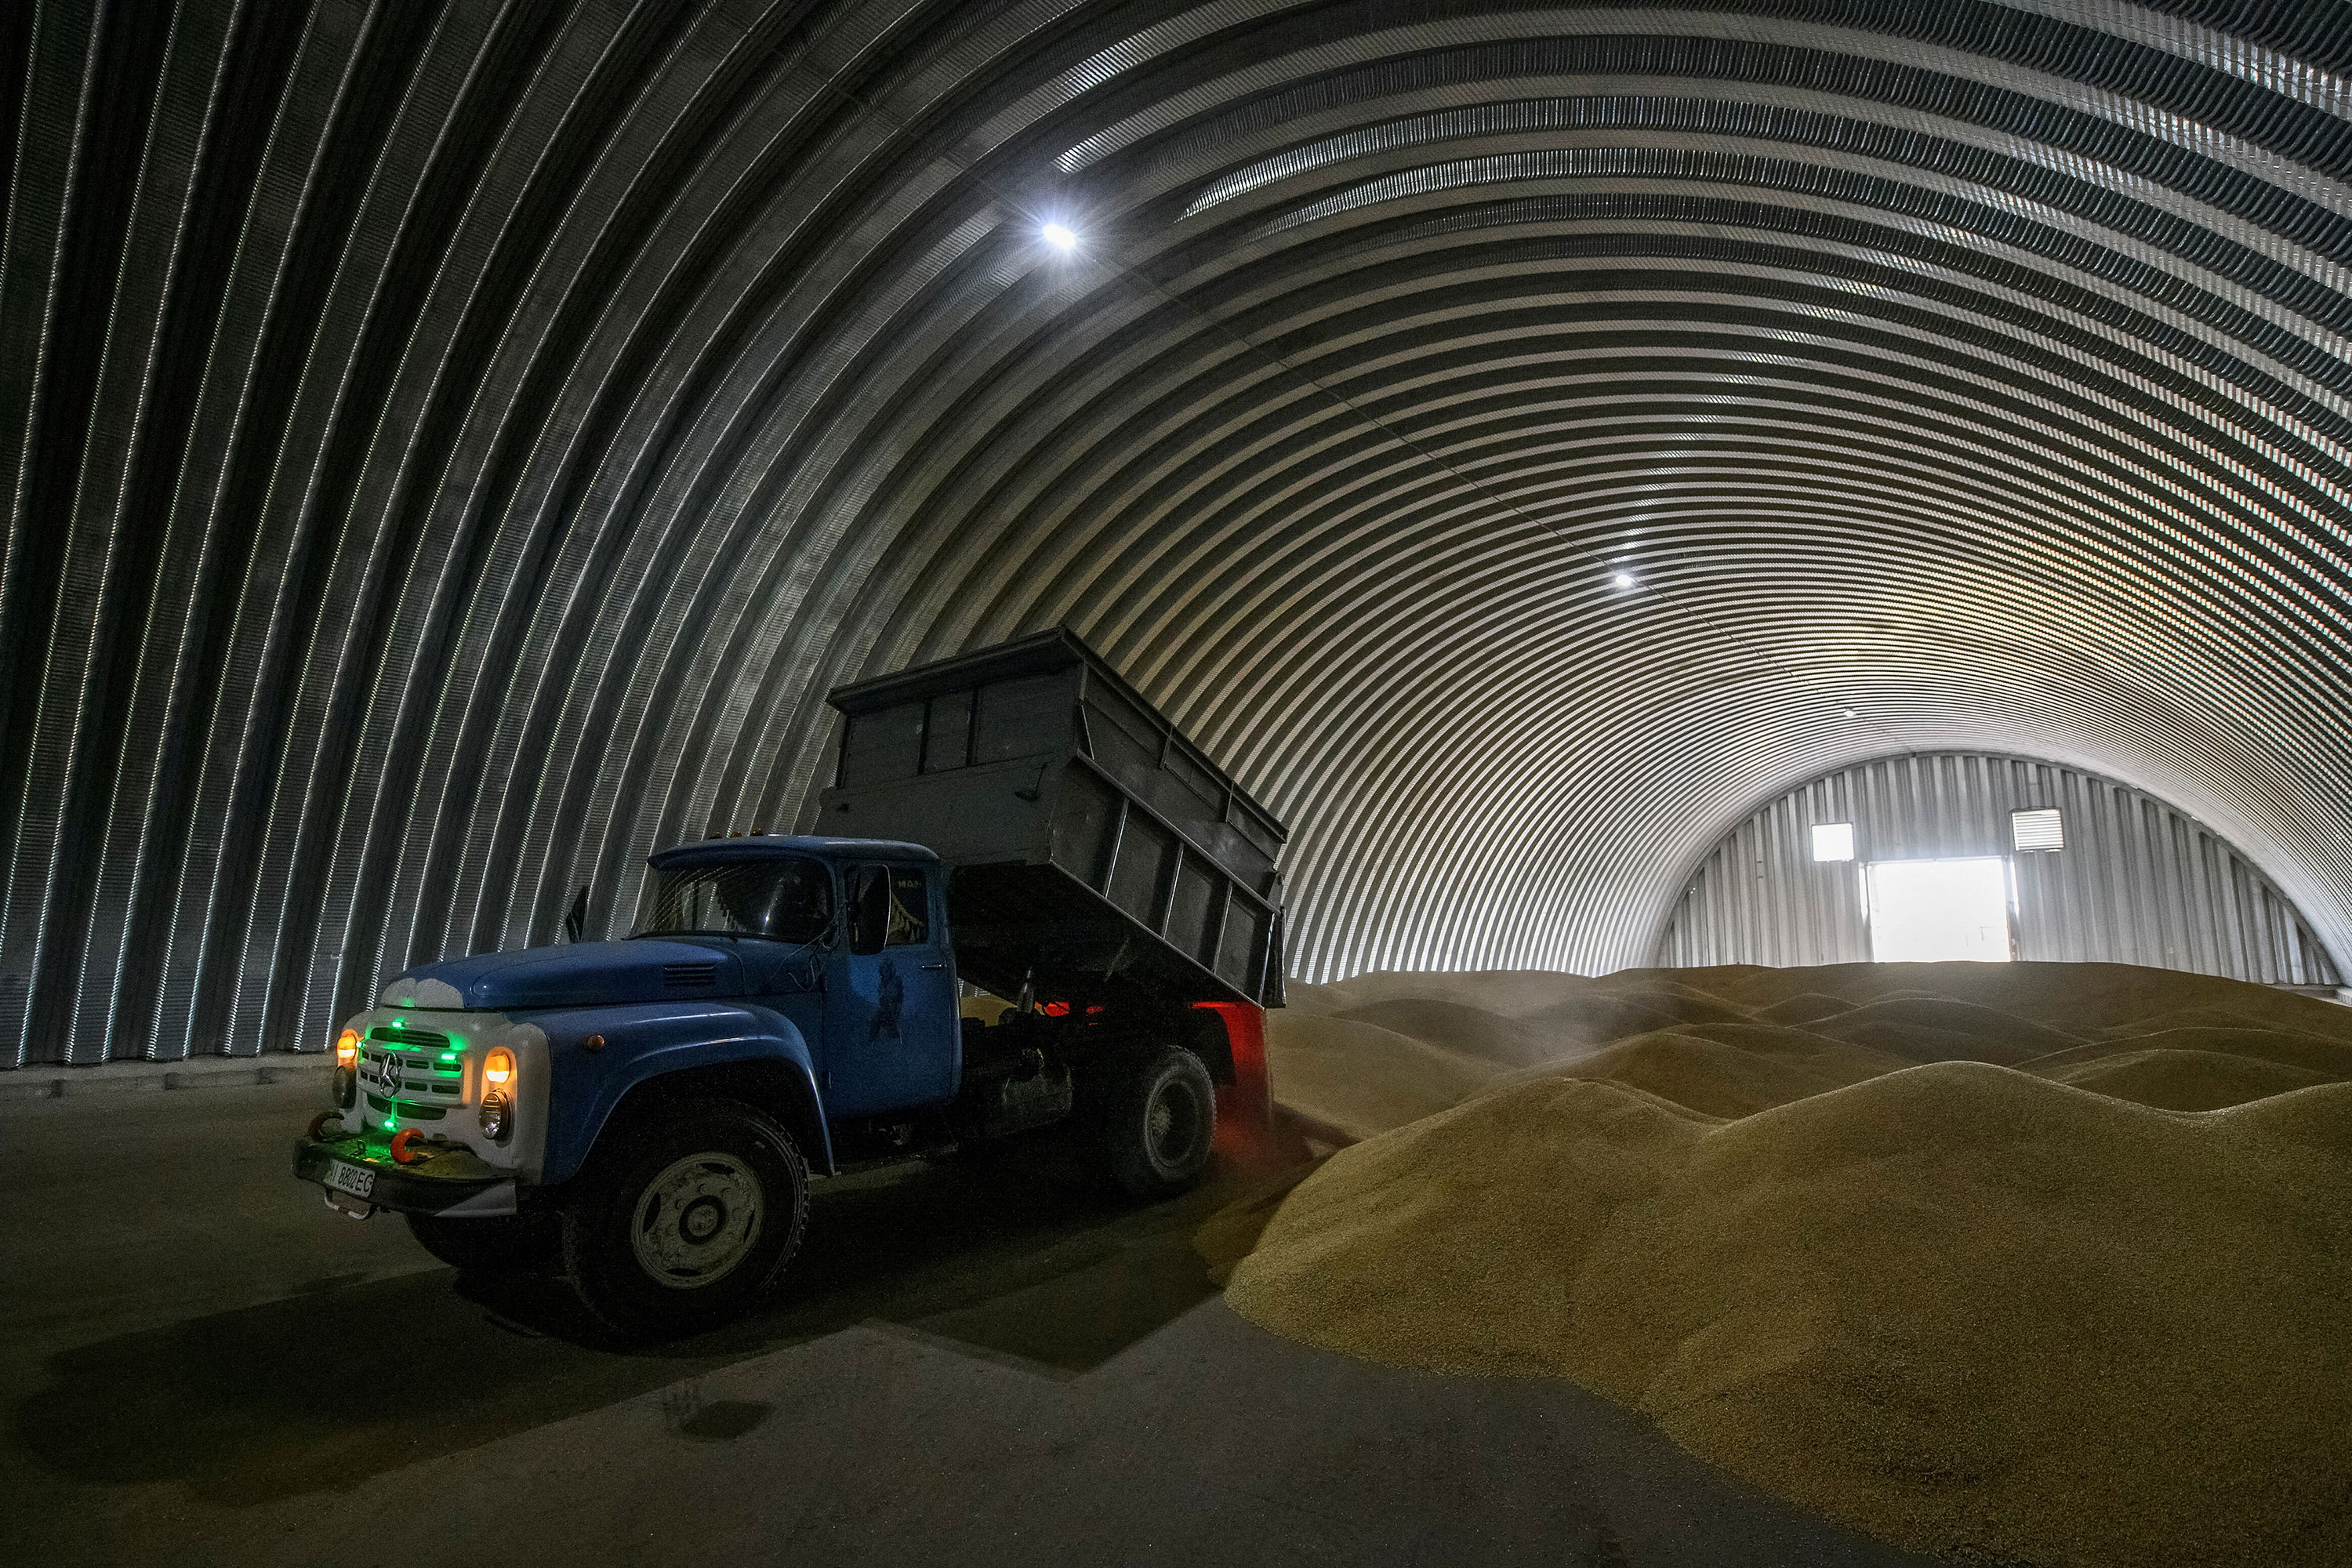 Wheat grains are unloaded inside a storage facility in Zghurivka, Ukraine, on August 9.